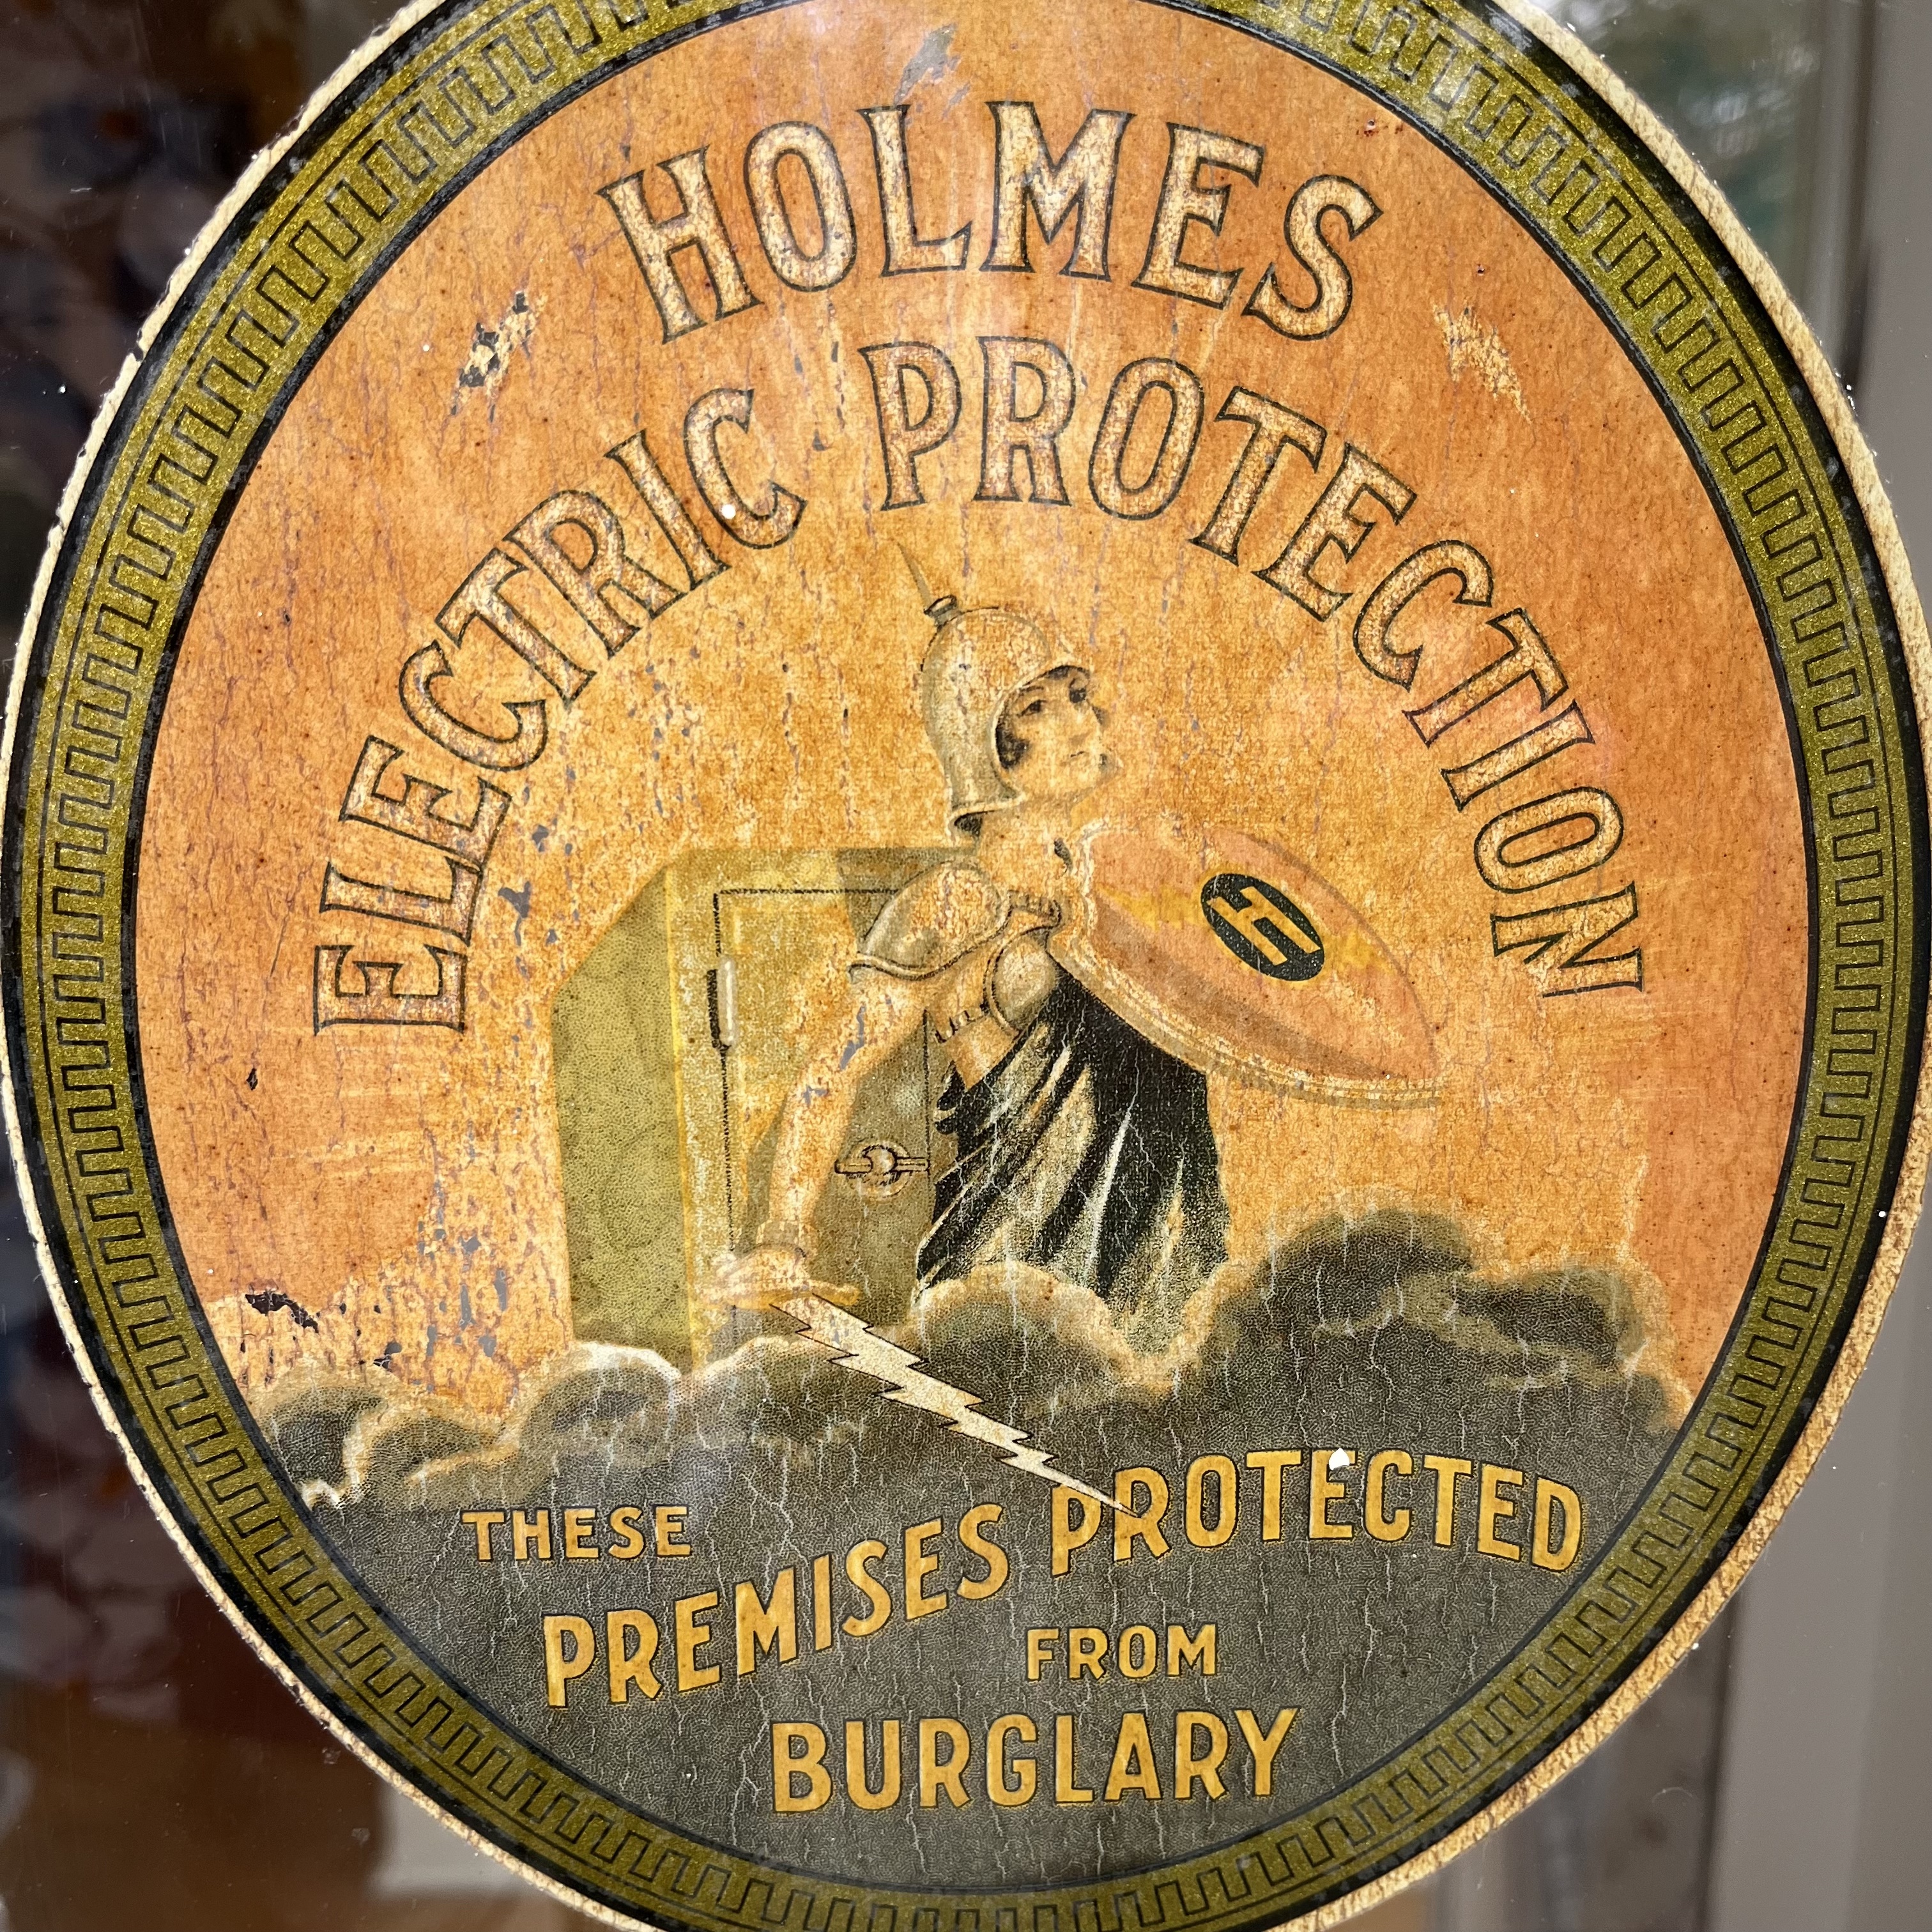 Holmes Electric Protection window decal. Forest Hills, New York. This company has an interesting history, look them up.